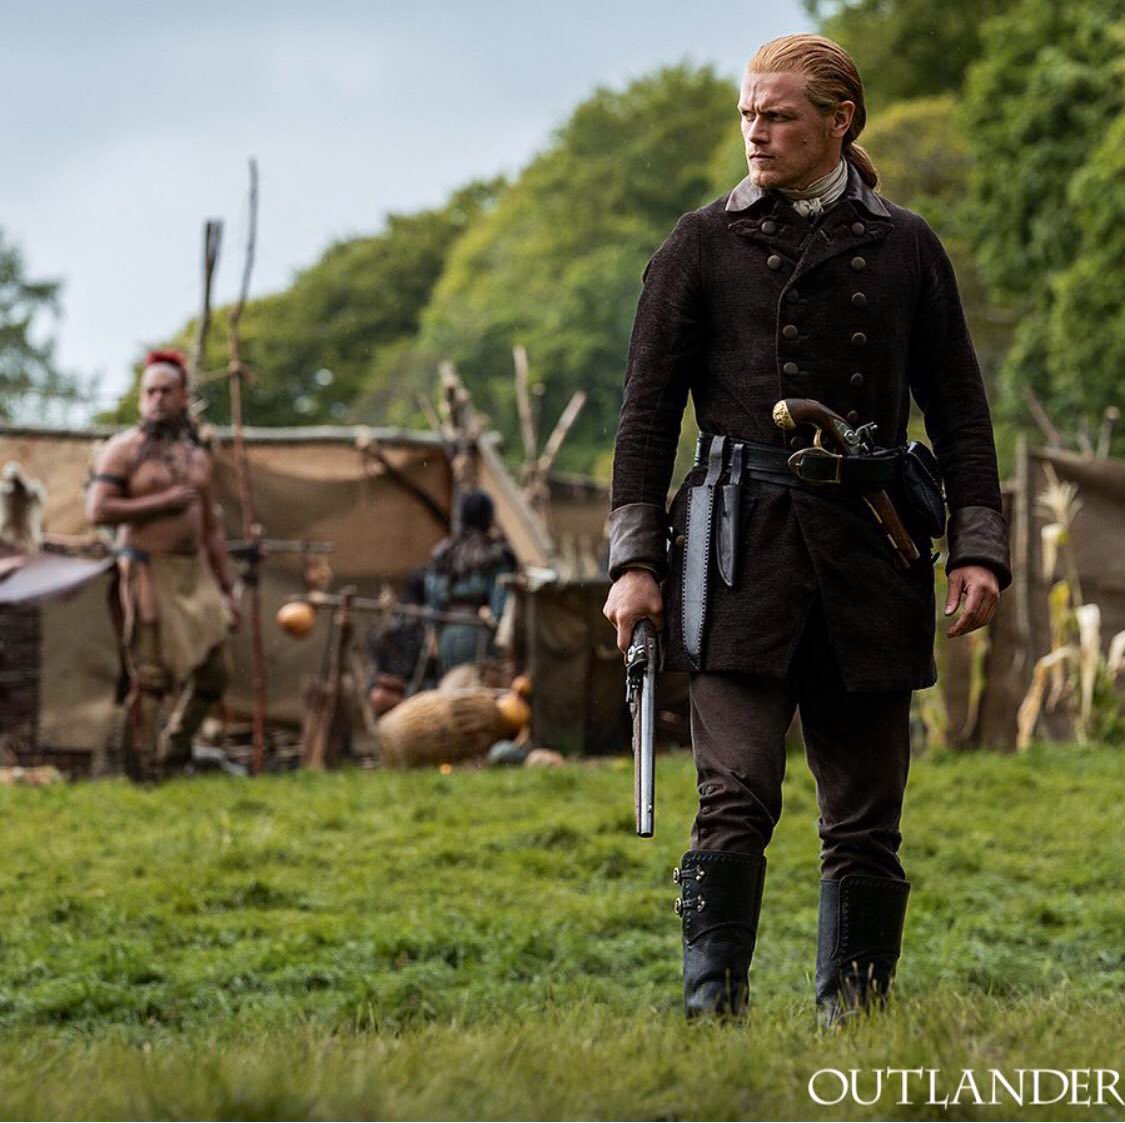 🌟 WRONG ANSWERS Jamie looks really annoyed. What’s going on? #Outlander #FridayFun